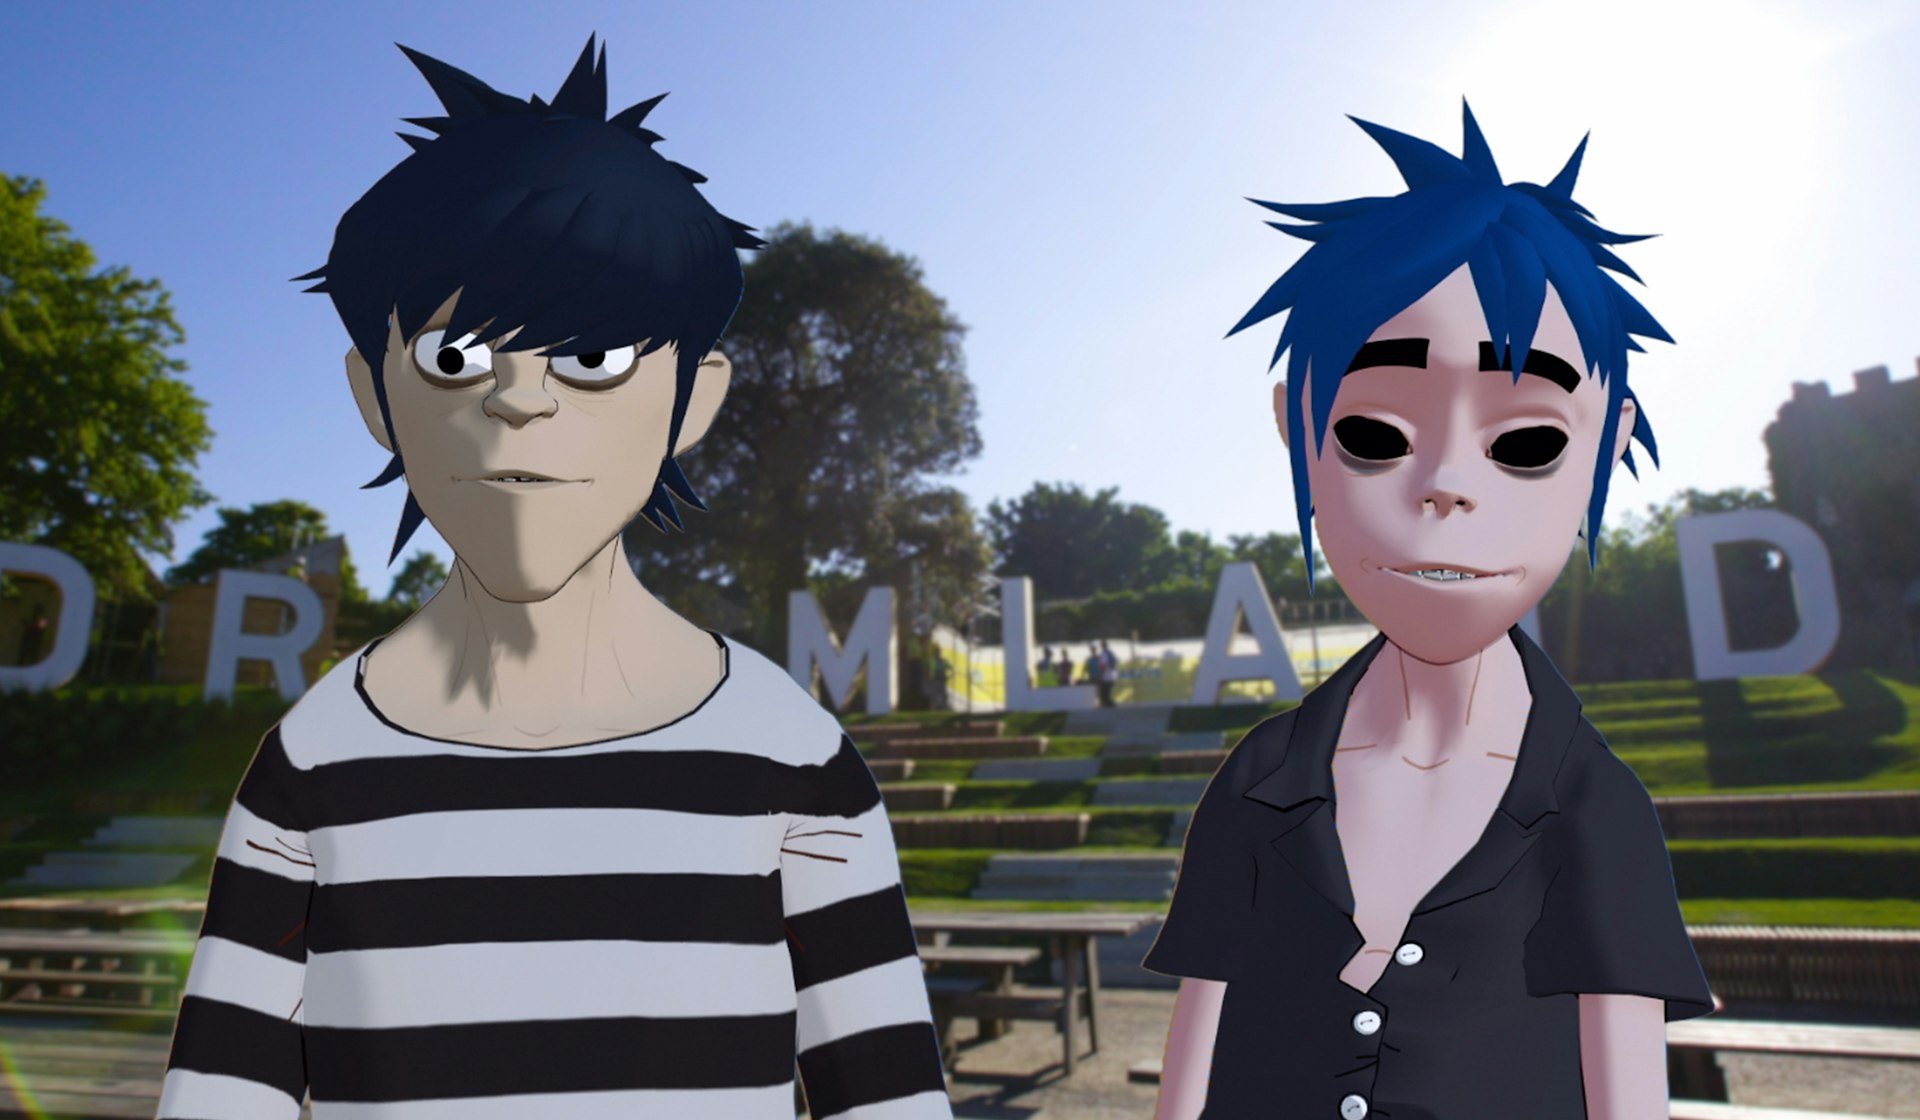 Watch Gorillaz and friends takeover a seaside amusement park